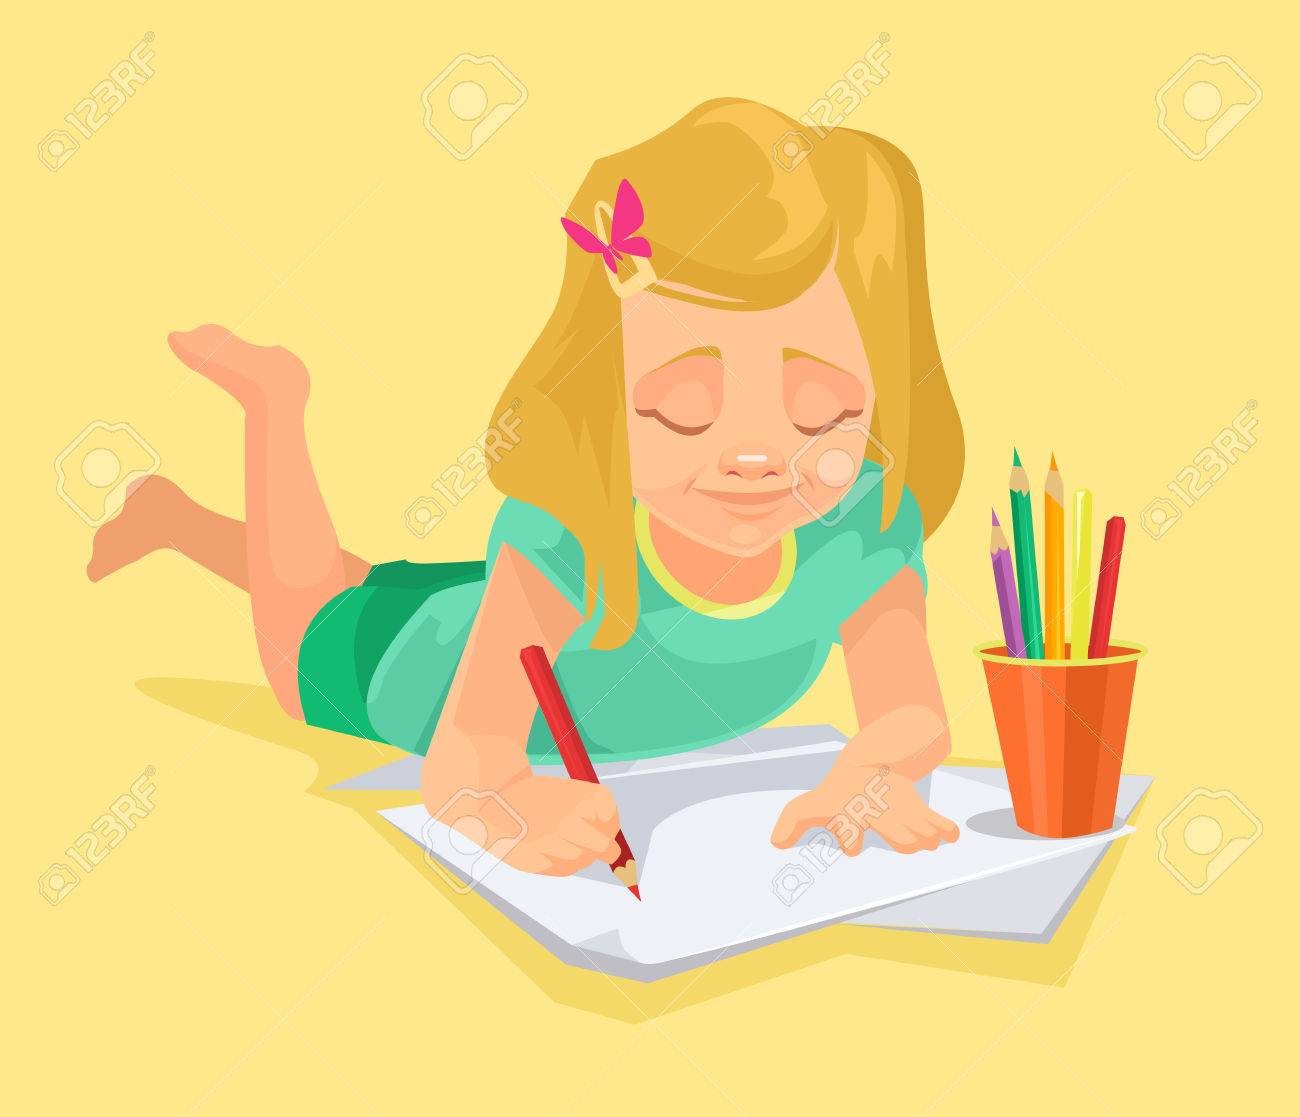 Girl drawing clipart 6 » Clipart Station.